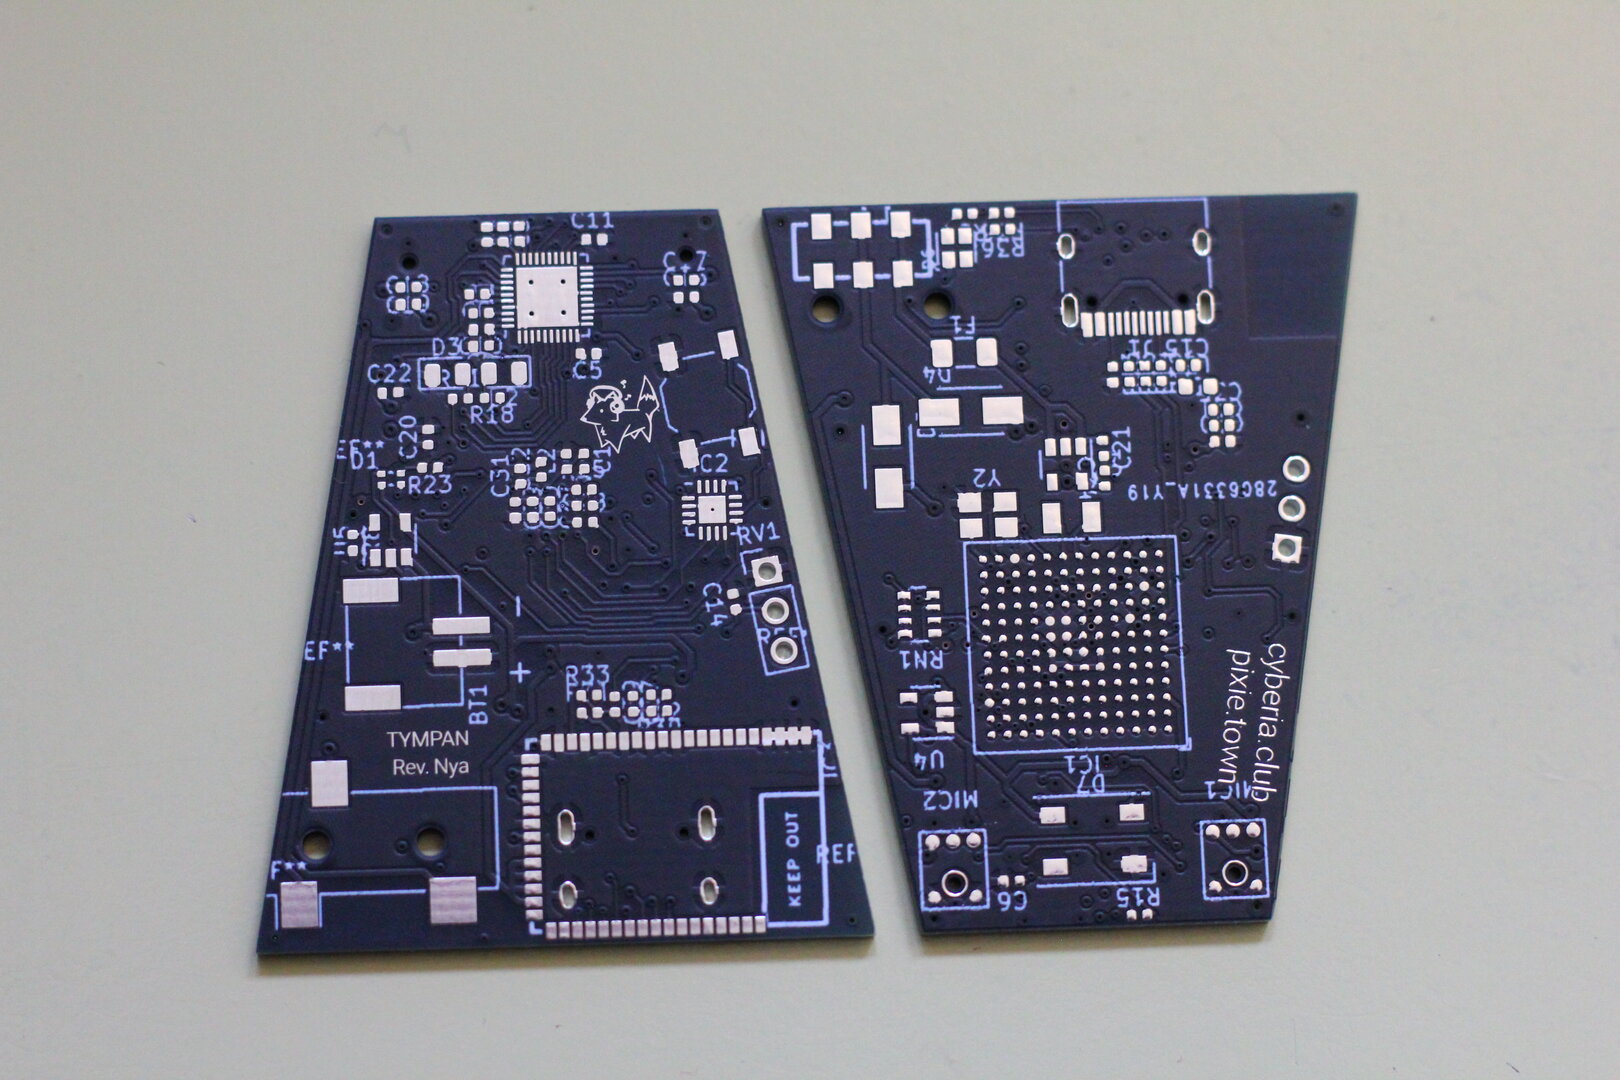 Two trapezoid shaped PCB's, showing the front and back design of the hearing aid PCB